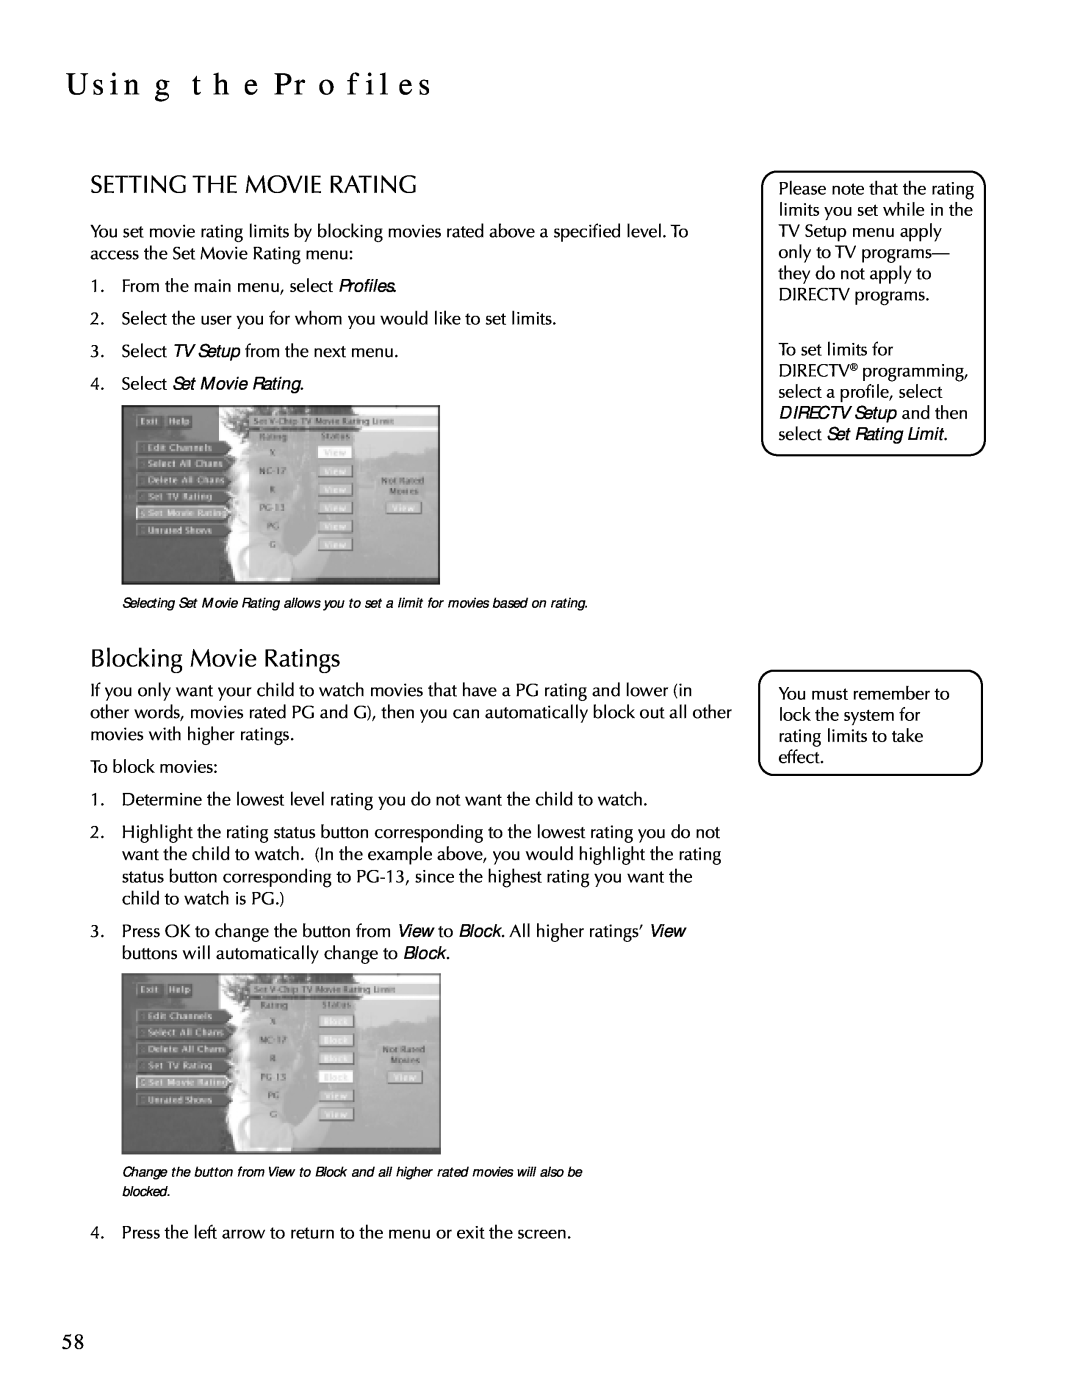 DirecTV HDTV user manual Setting The Movie Rating, Blocking Movie Ratings, Using The Profiles, Select Set Movie Rating 